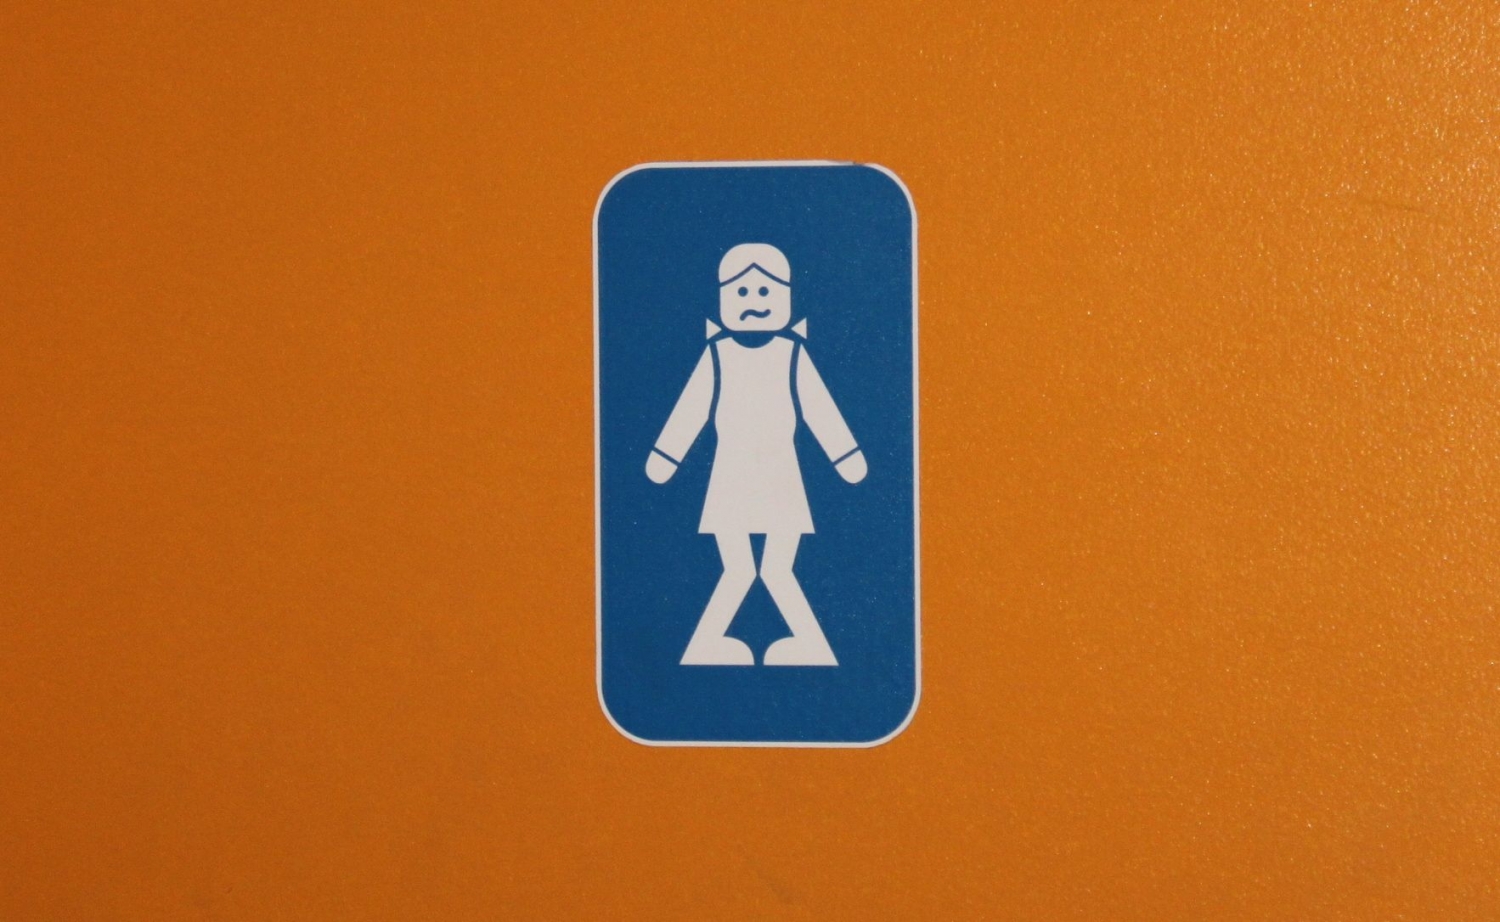 WC and Restroom Signs Part 1 – Smashing Magazine